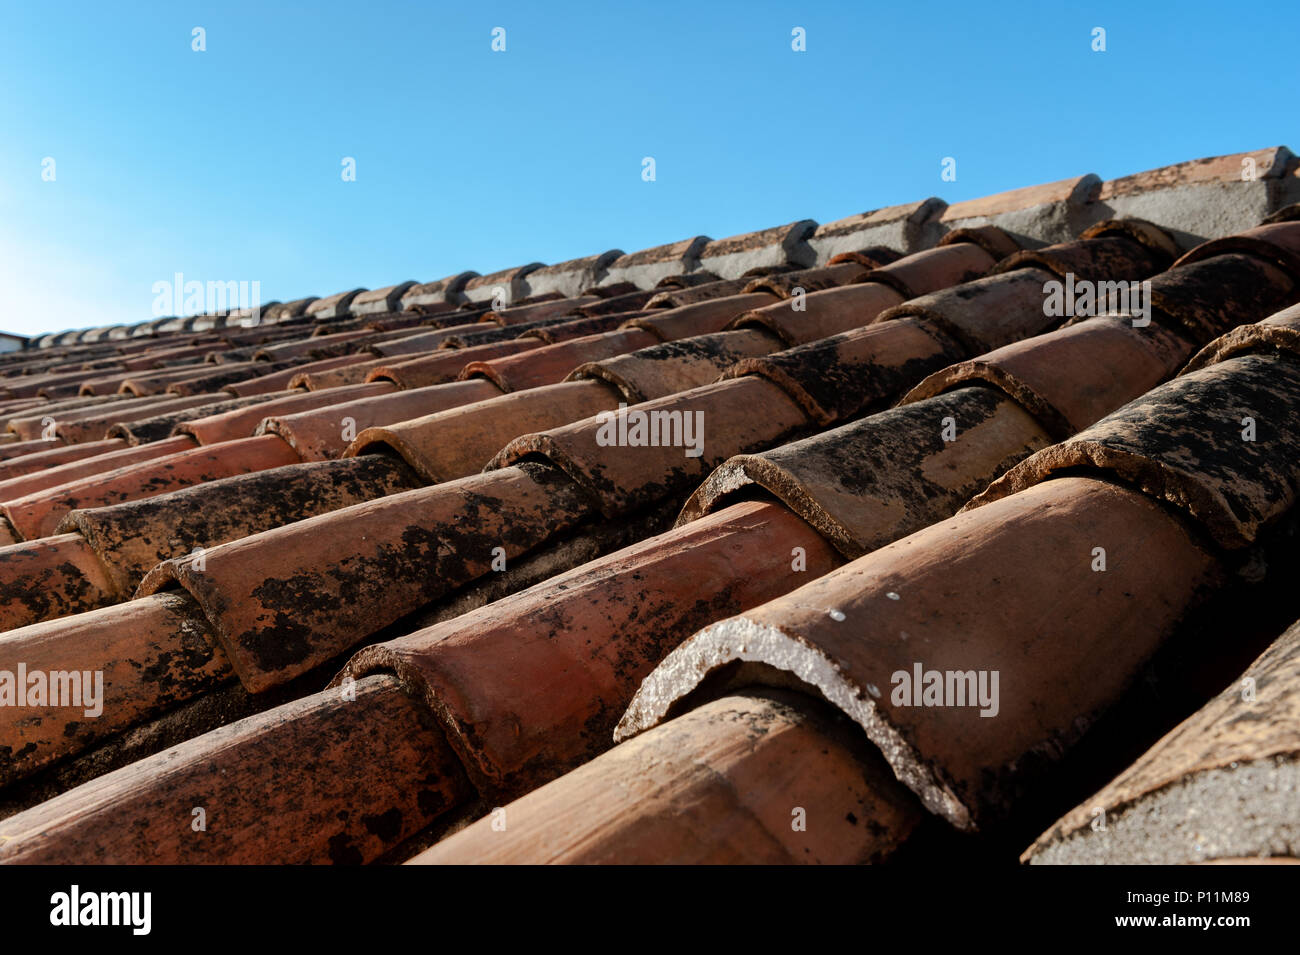 Spanish roof tiles on a clear day in Malaga, Costa Del Sol, Spain with copy space. Stock Photo